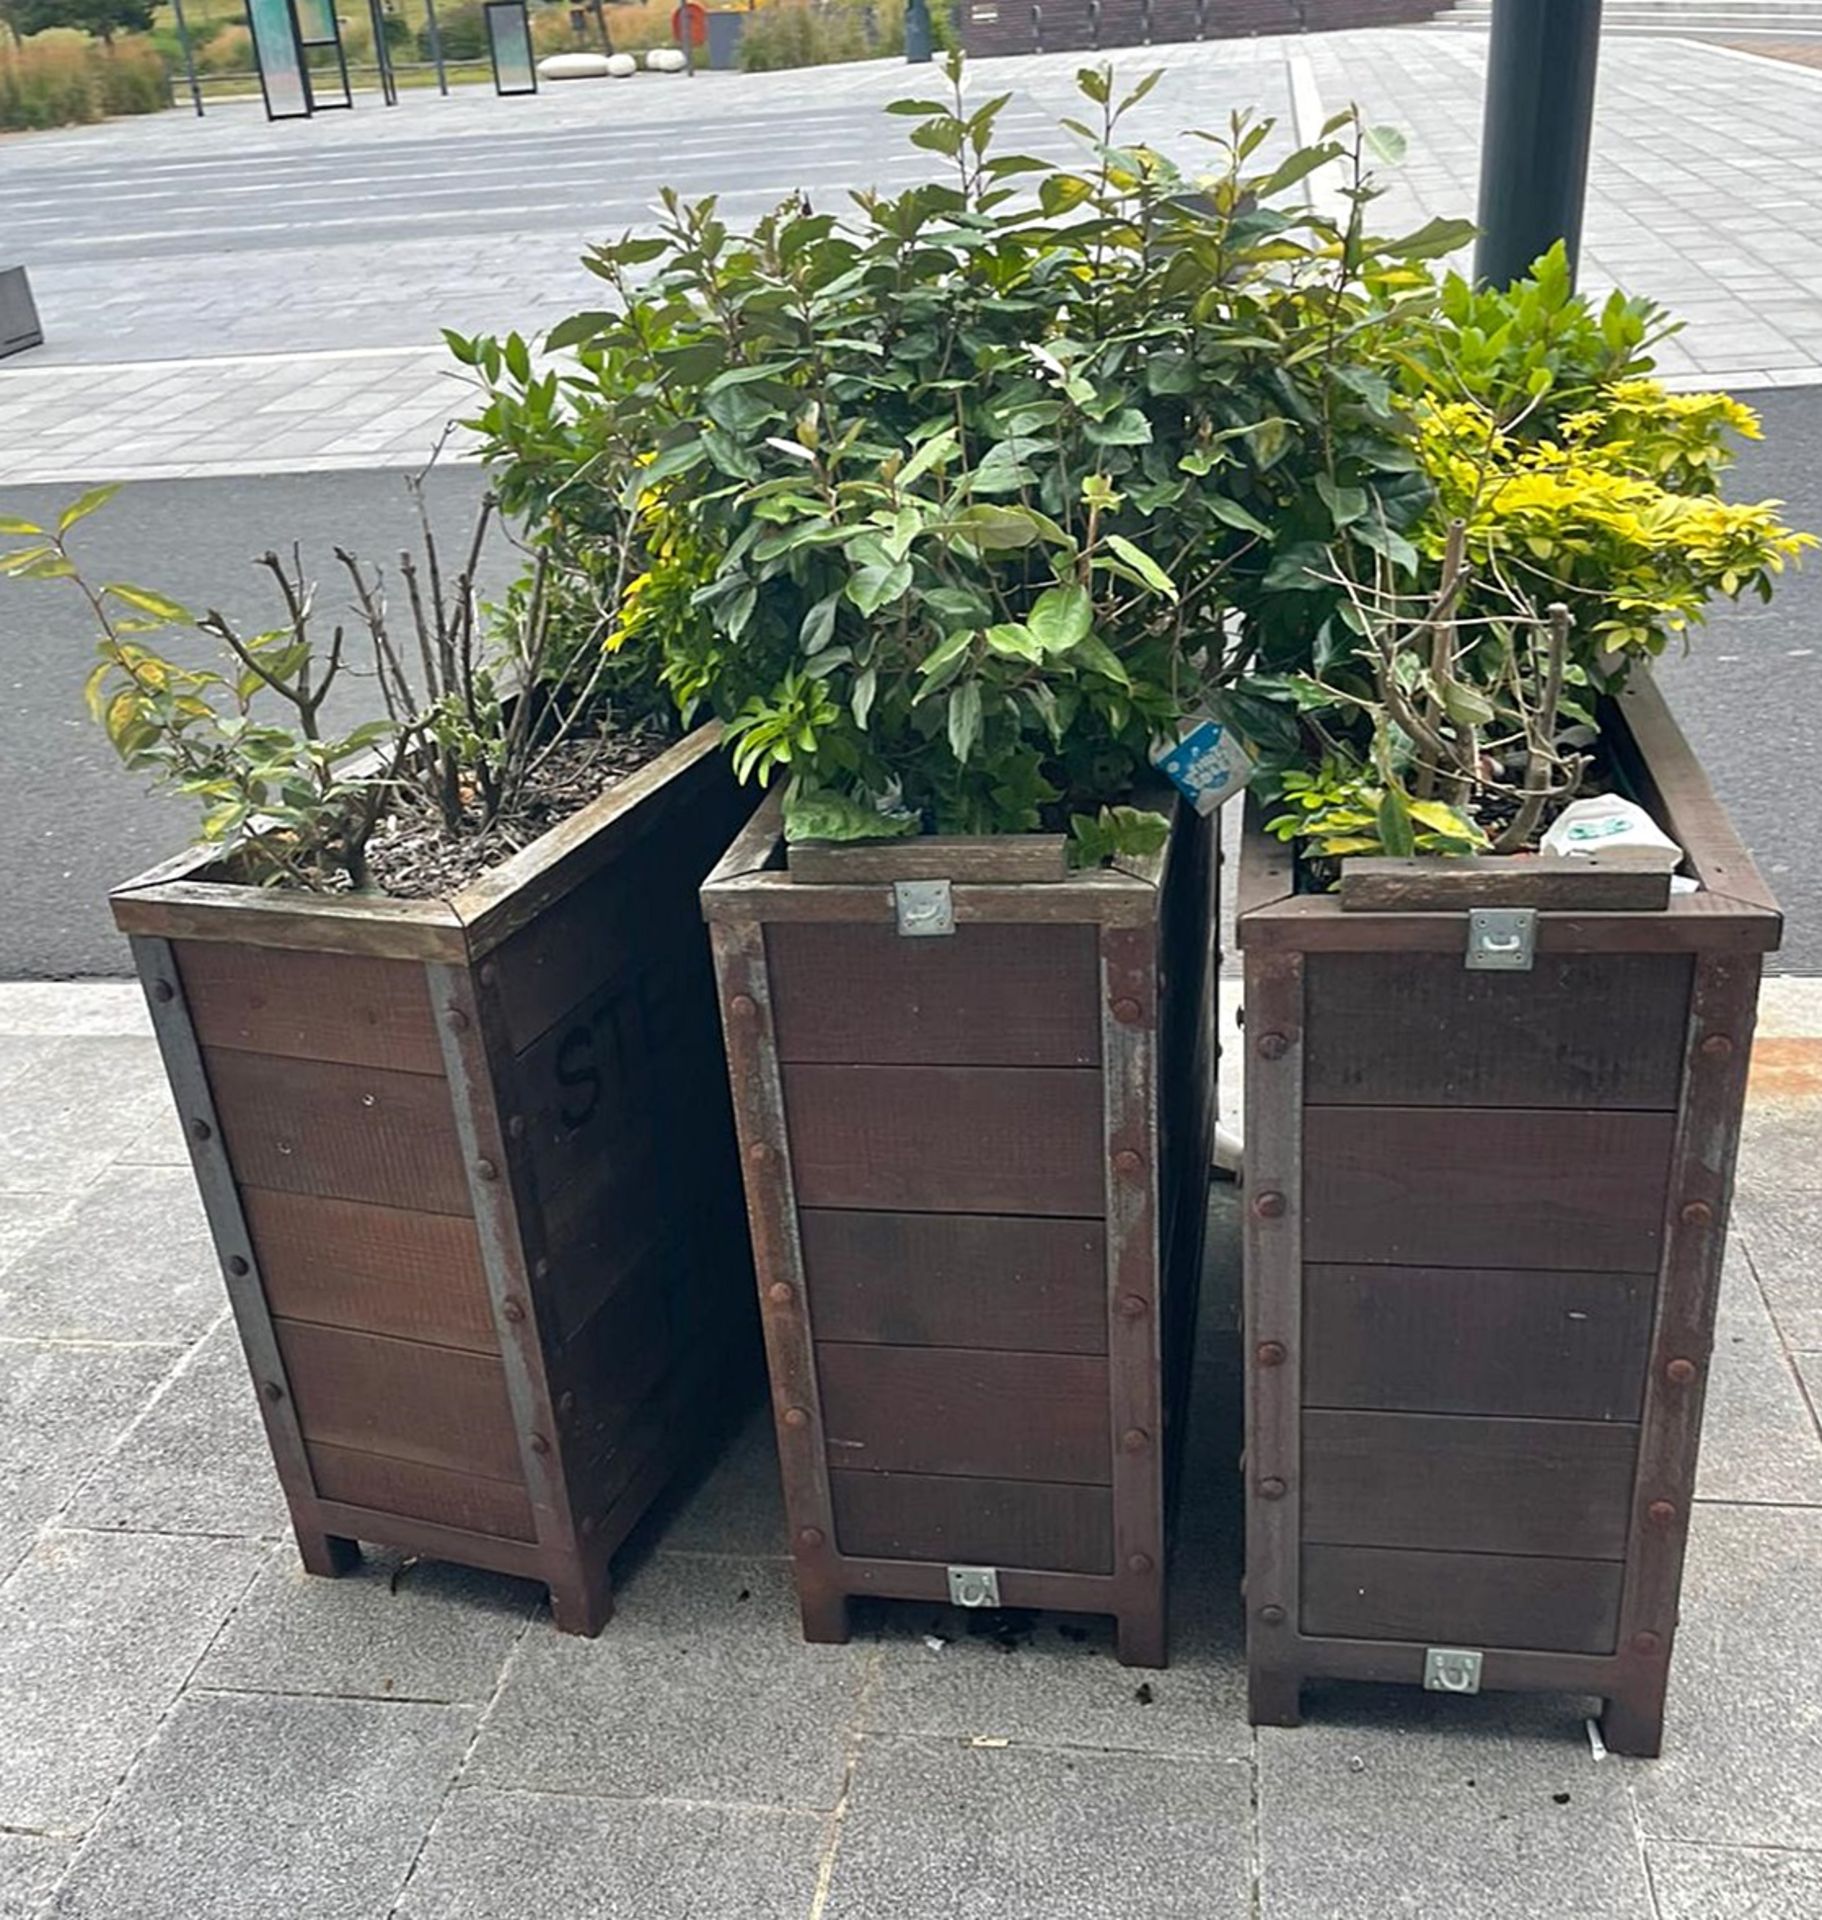 4 x Outdoor Wooden Planters With Live Plants - Size H90 x W121 x D41 cms - CL674 - Location: - Image 2 of 2